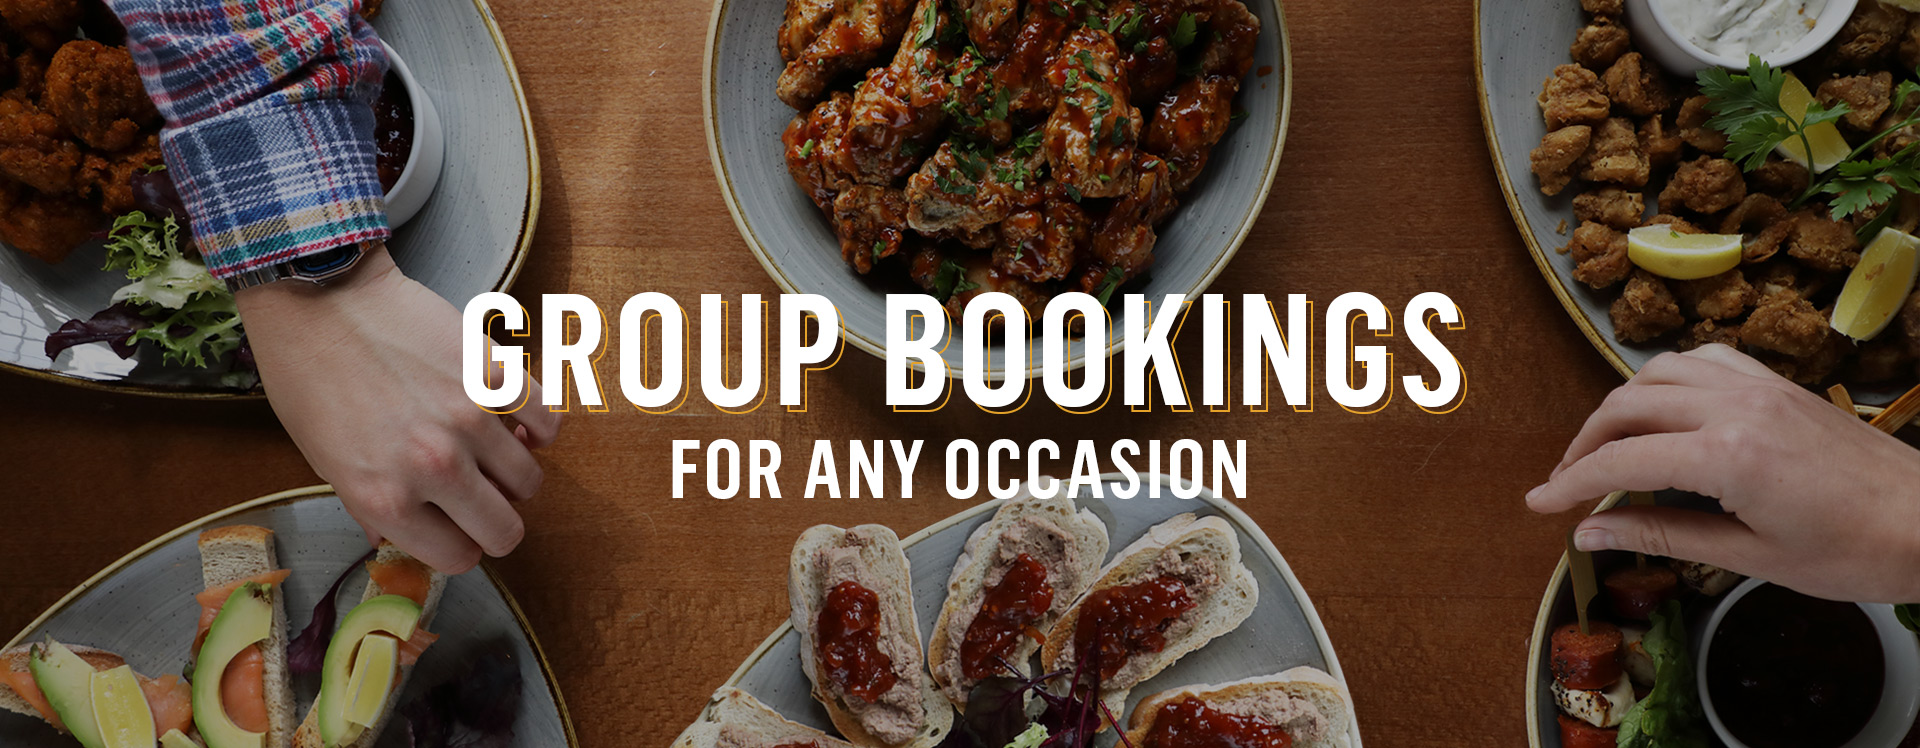 Group Bookings at The Hoop and Grapes